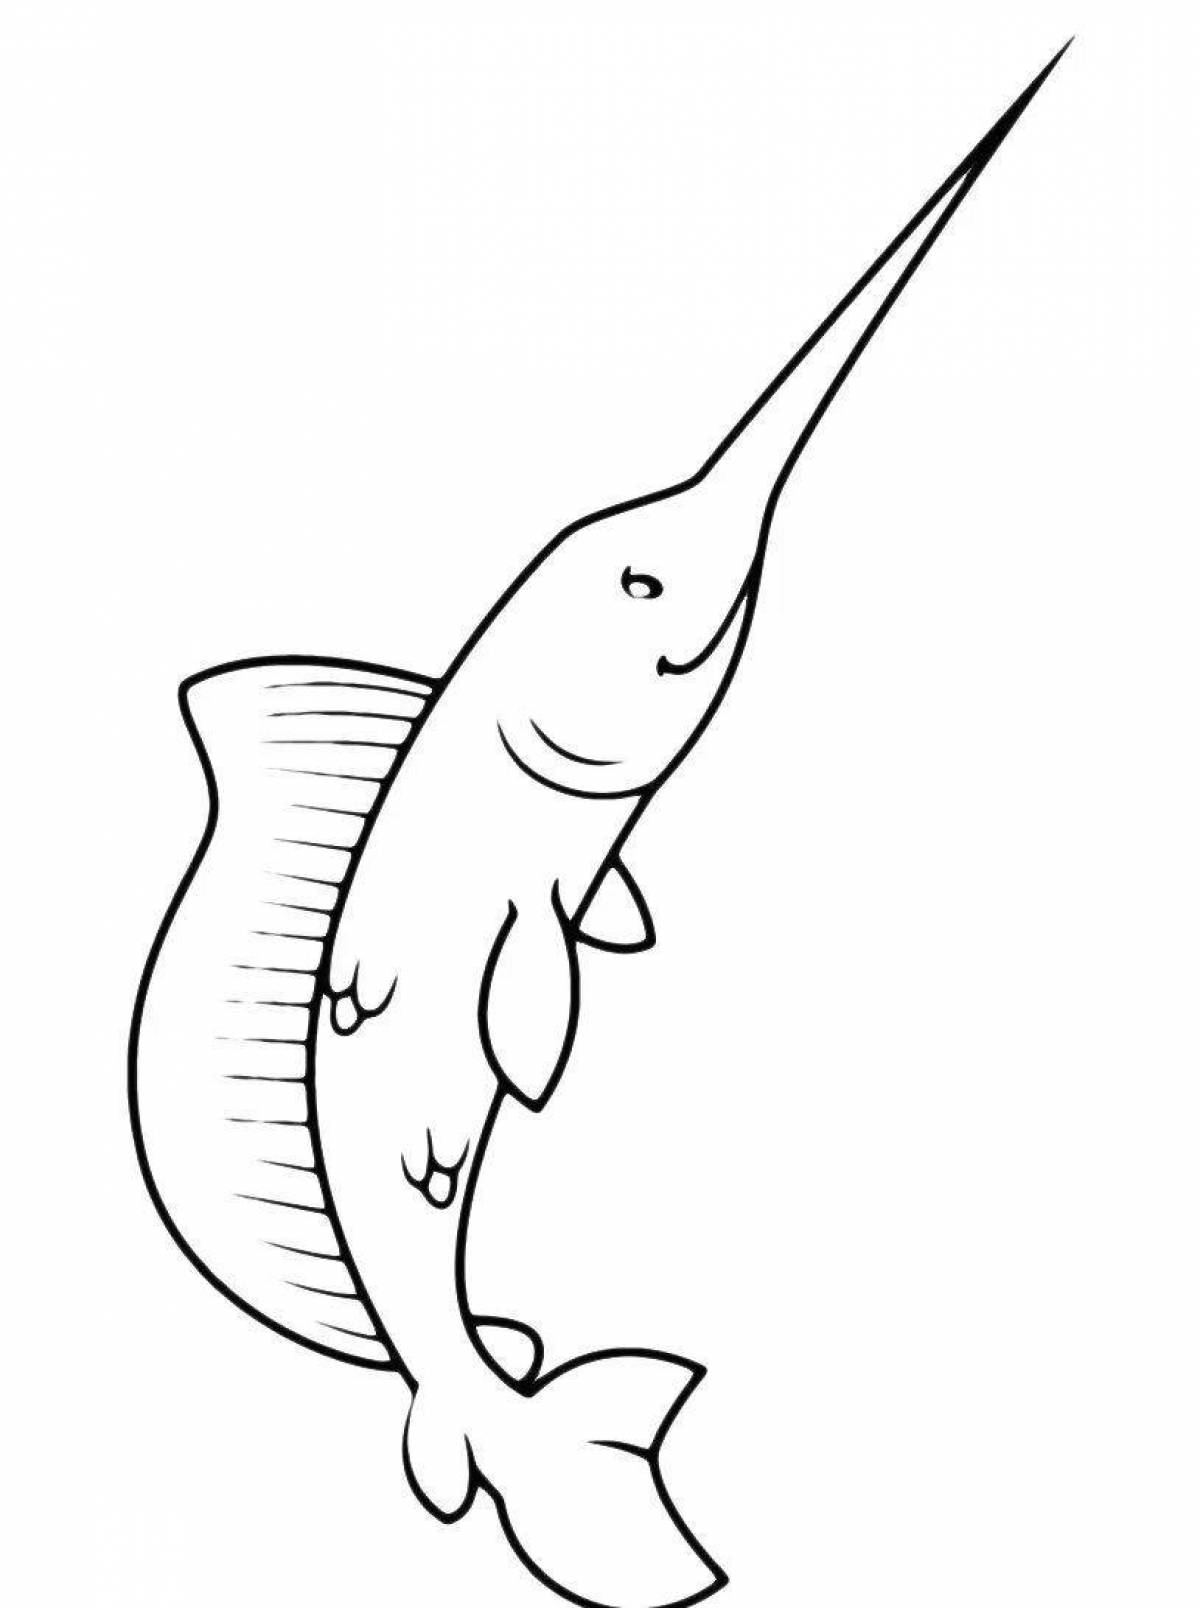 Exquisite fish sword coloring page for kids